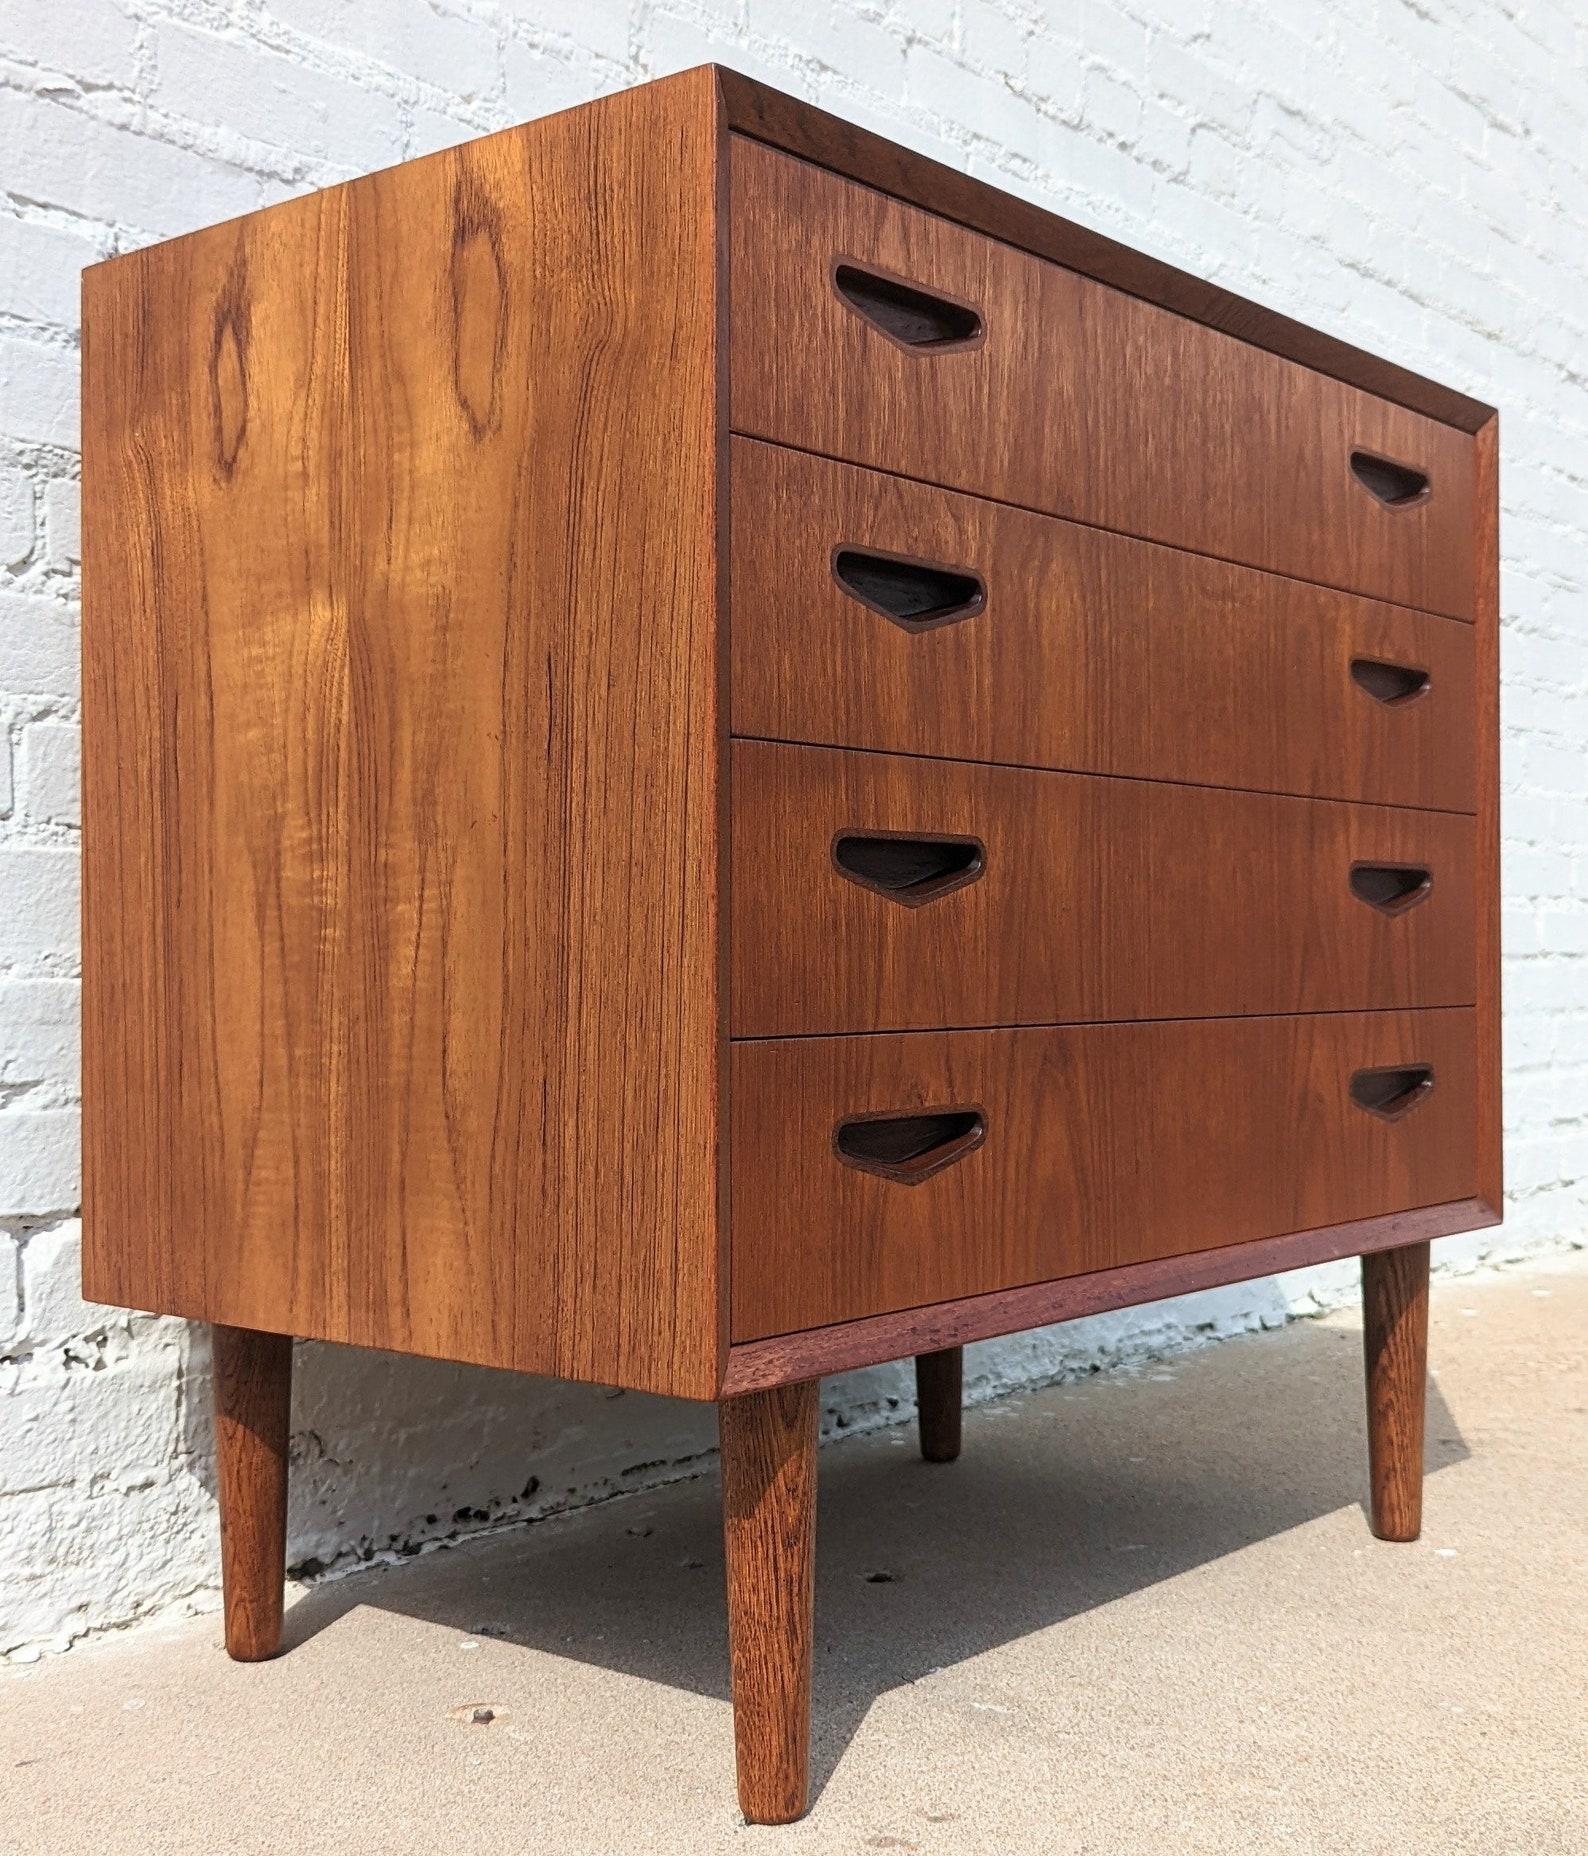 Mid Century Danish Modern Teak Cabinet
 
Above average vintage condition and structurally sound. Has some expected slight finish wear and scratching. Beautifully crafted. Outdoor listing pictures might appear slightly darker or more red than the